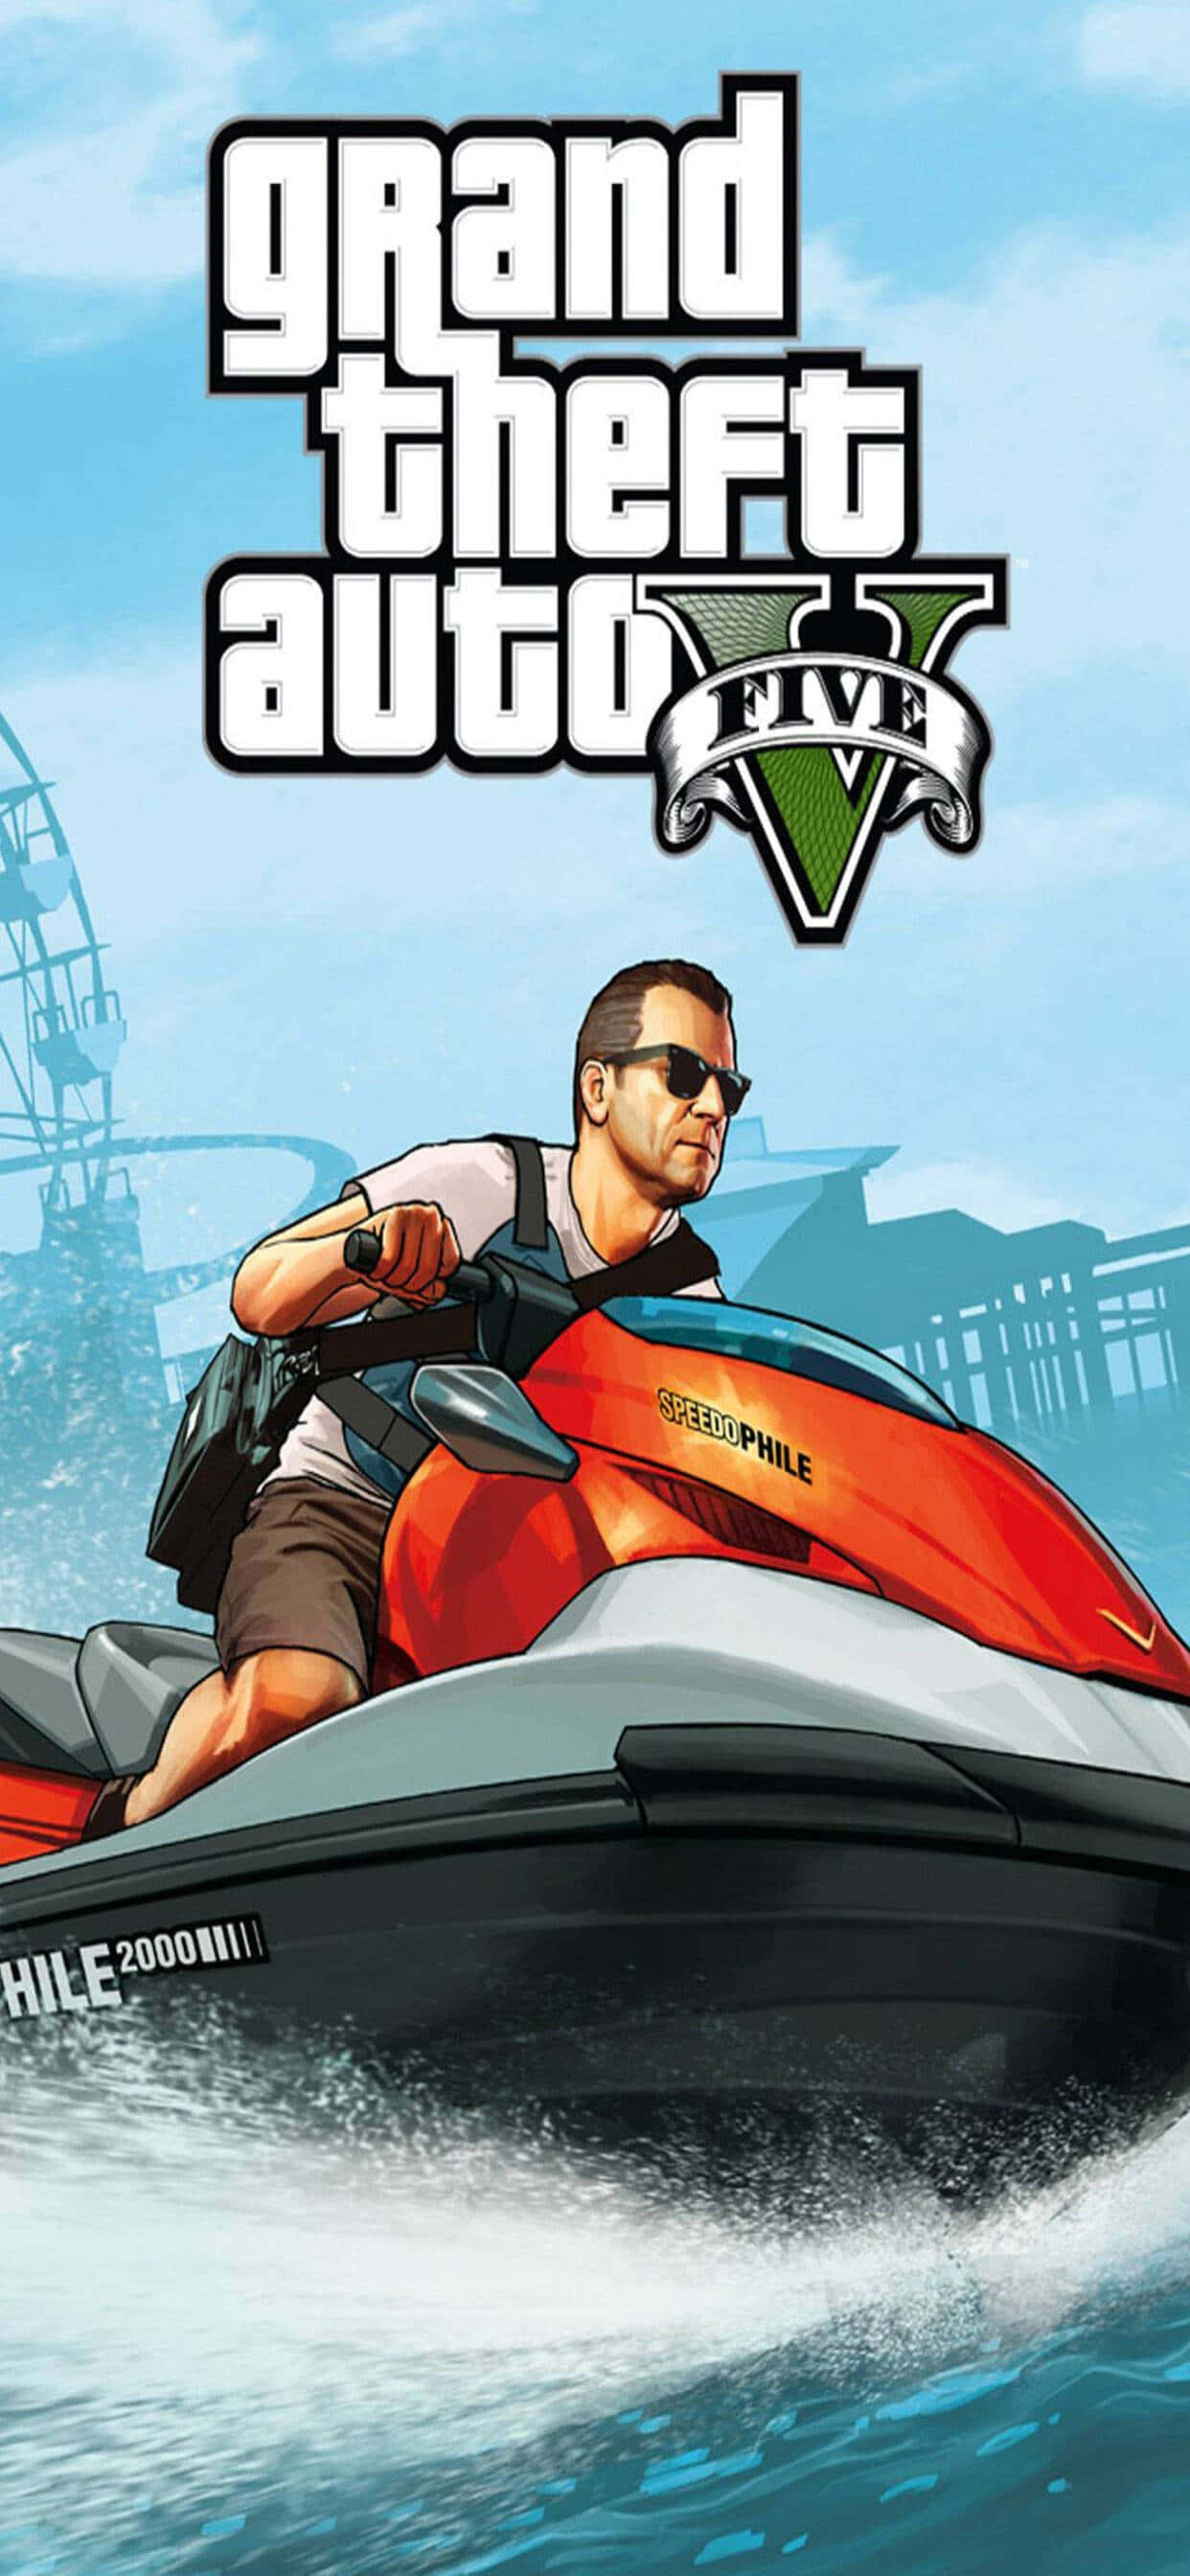 Iphone Xs Max Grand Theft Auto V Background Michael In A Jet Ski